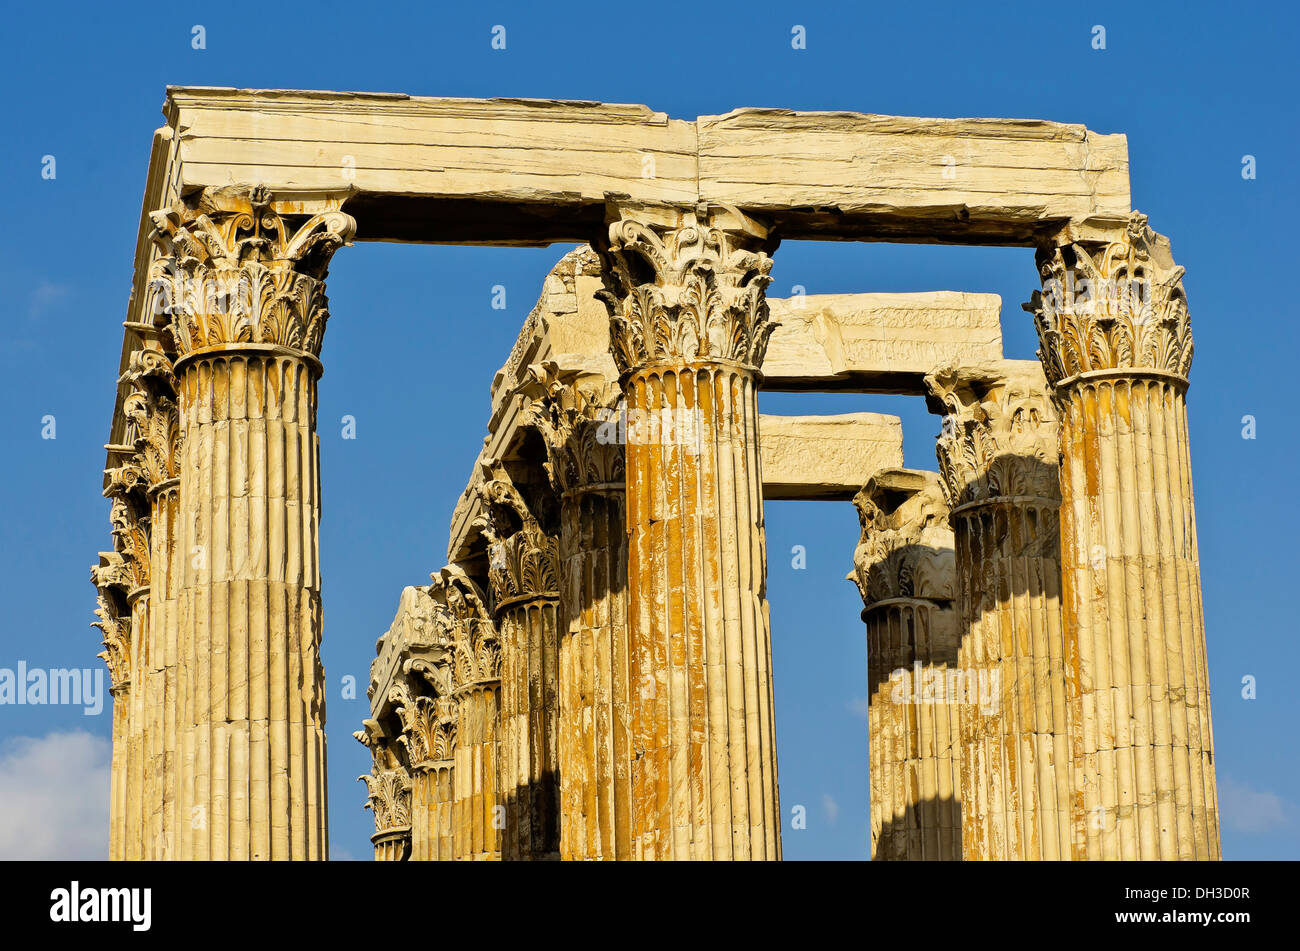 View of the columns of the Temple of Olympian Zeus, Olympieion, Athens, Greece, Europe Stock Photo